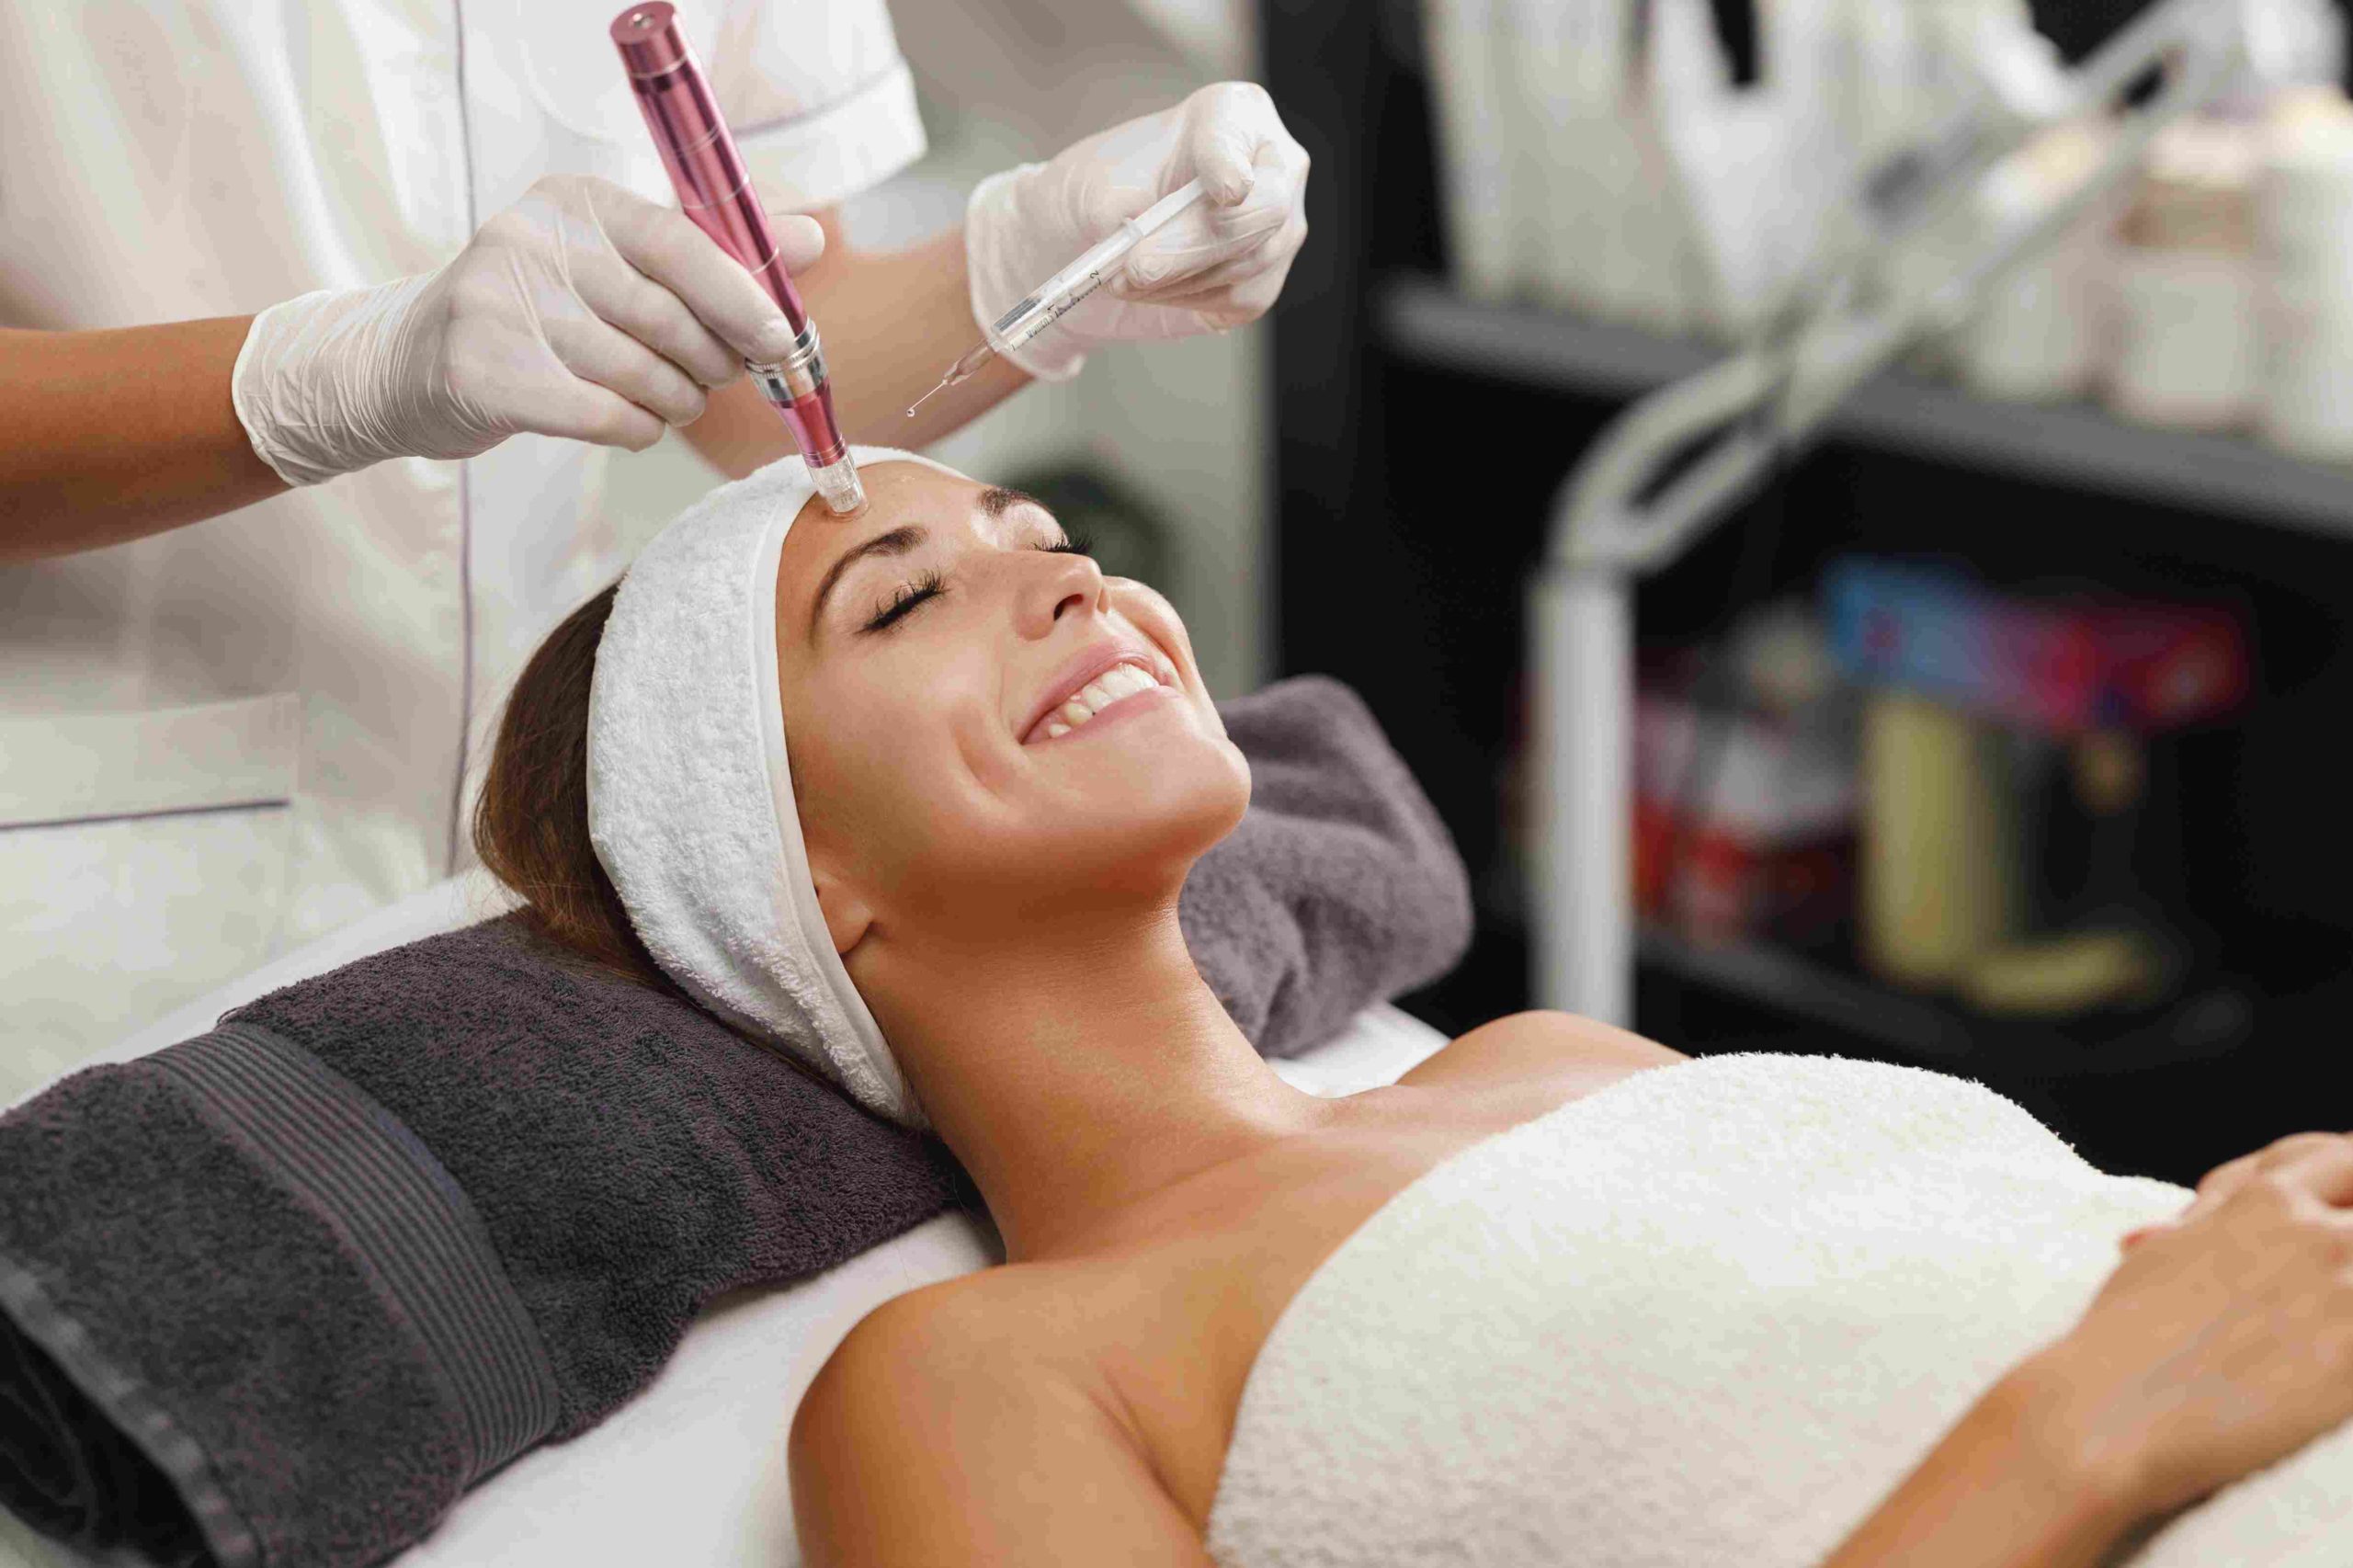 Lying Dimpled Smiling Woman Getting RF Microneedling Treatment | Avail Aesthetics in Cary, NC